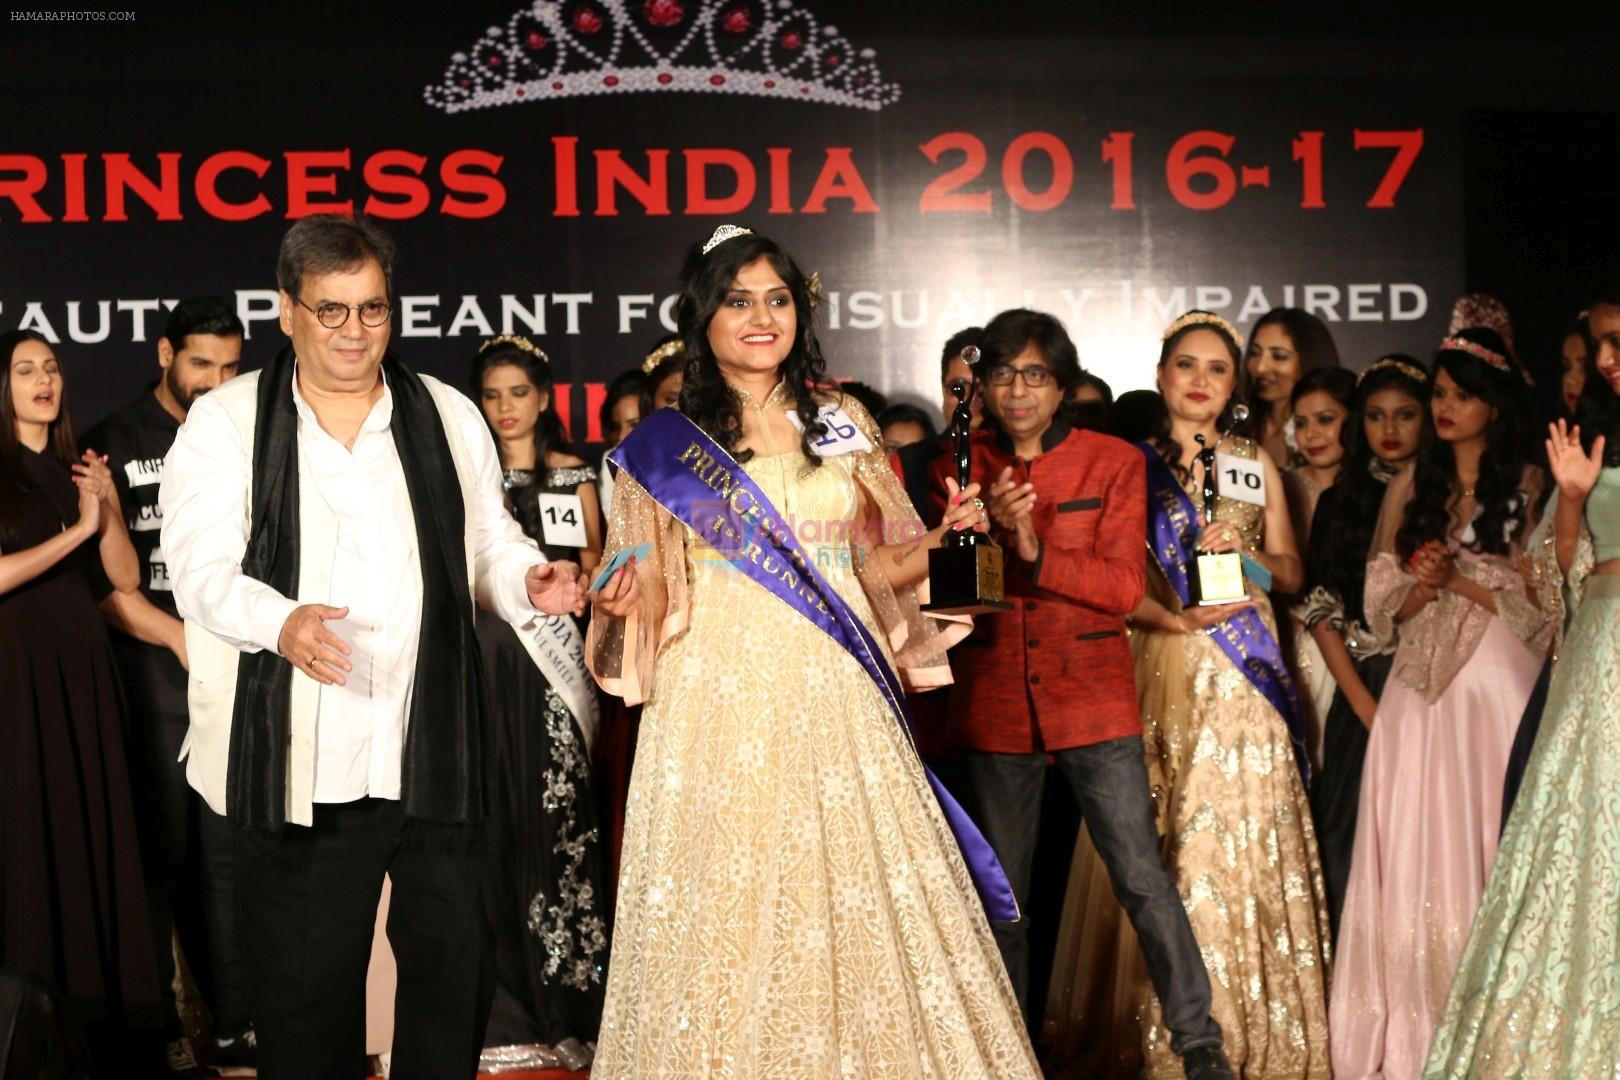 Subhash GHai attends Princess India 2016-17 on 8th March 2017